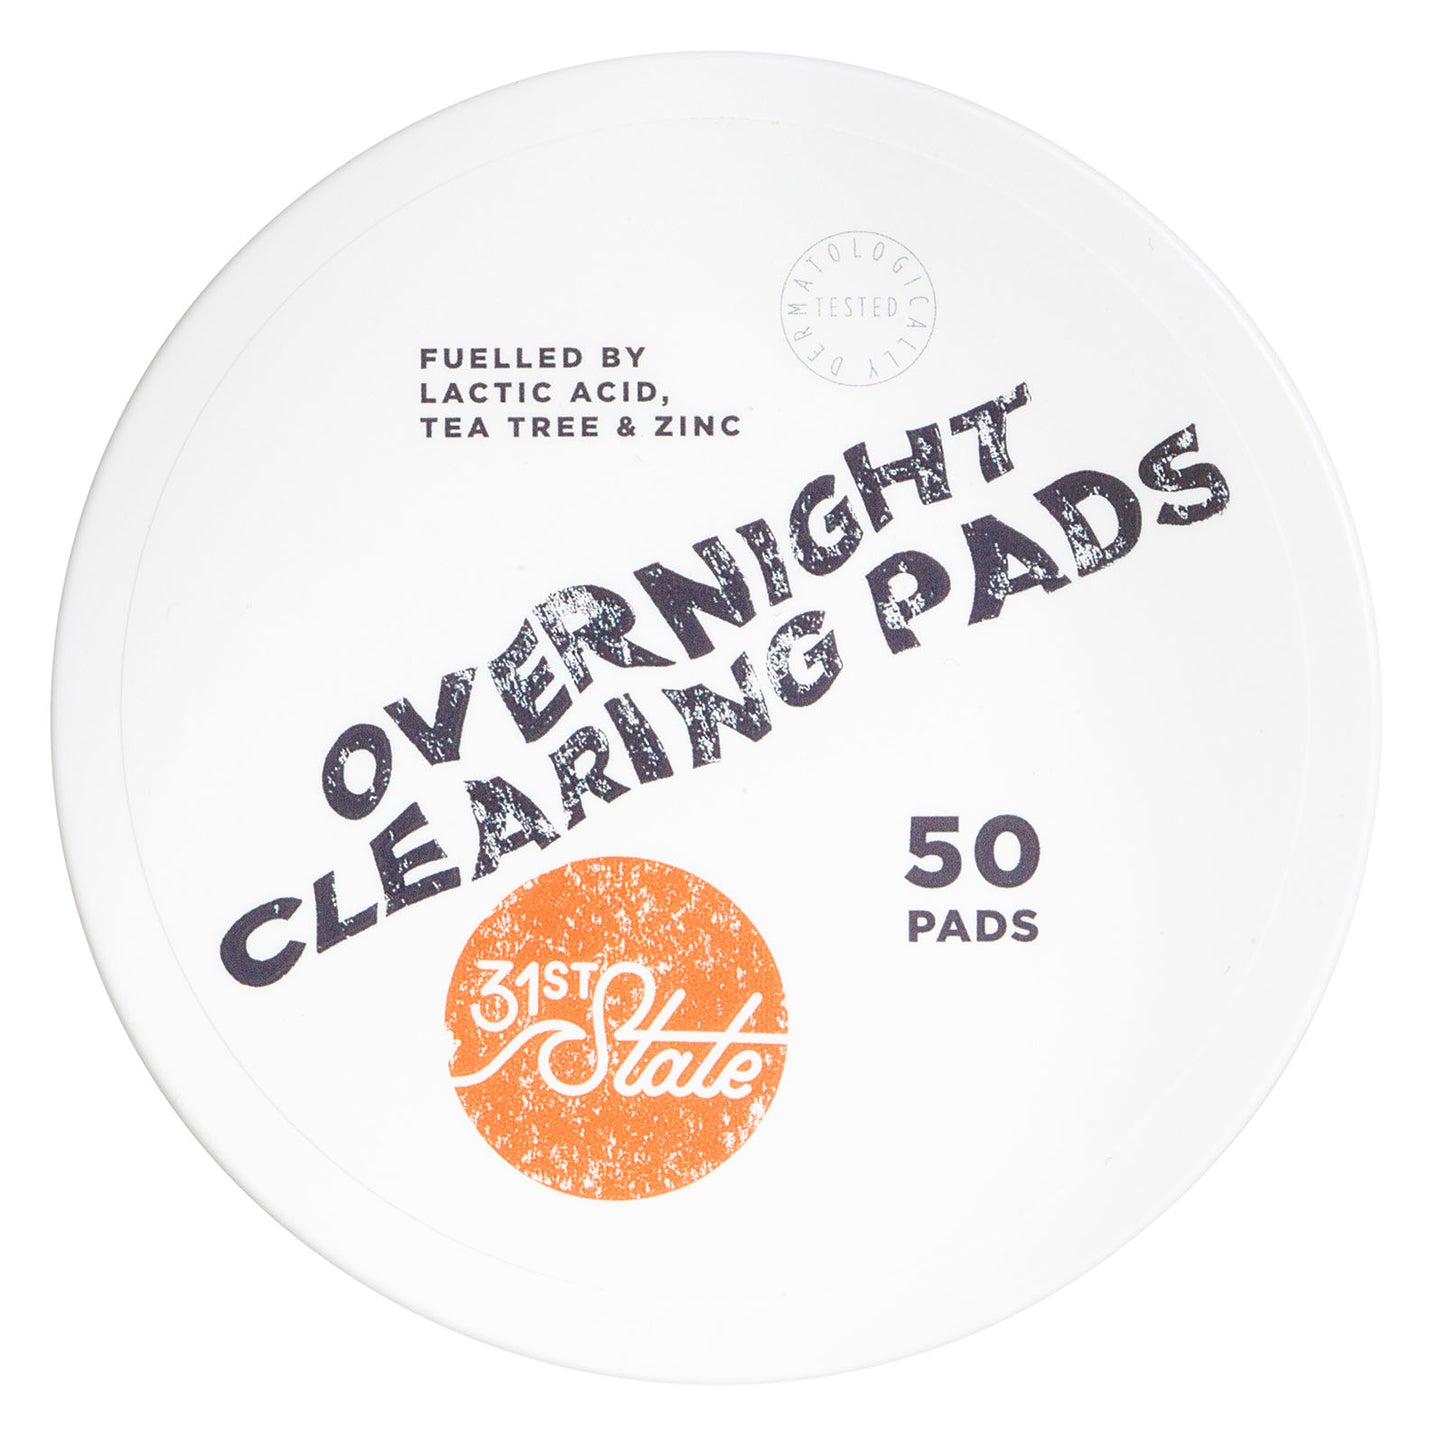 Vegan Overnight Acne Clearing Pads